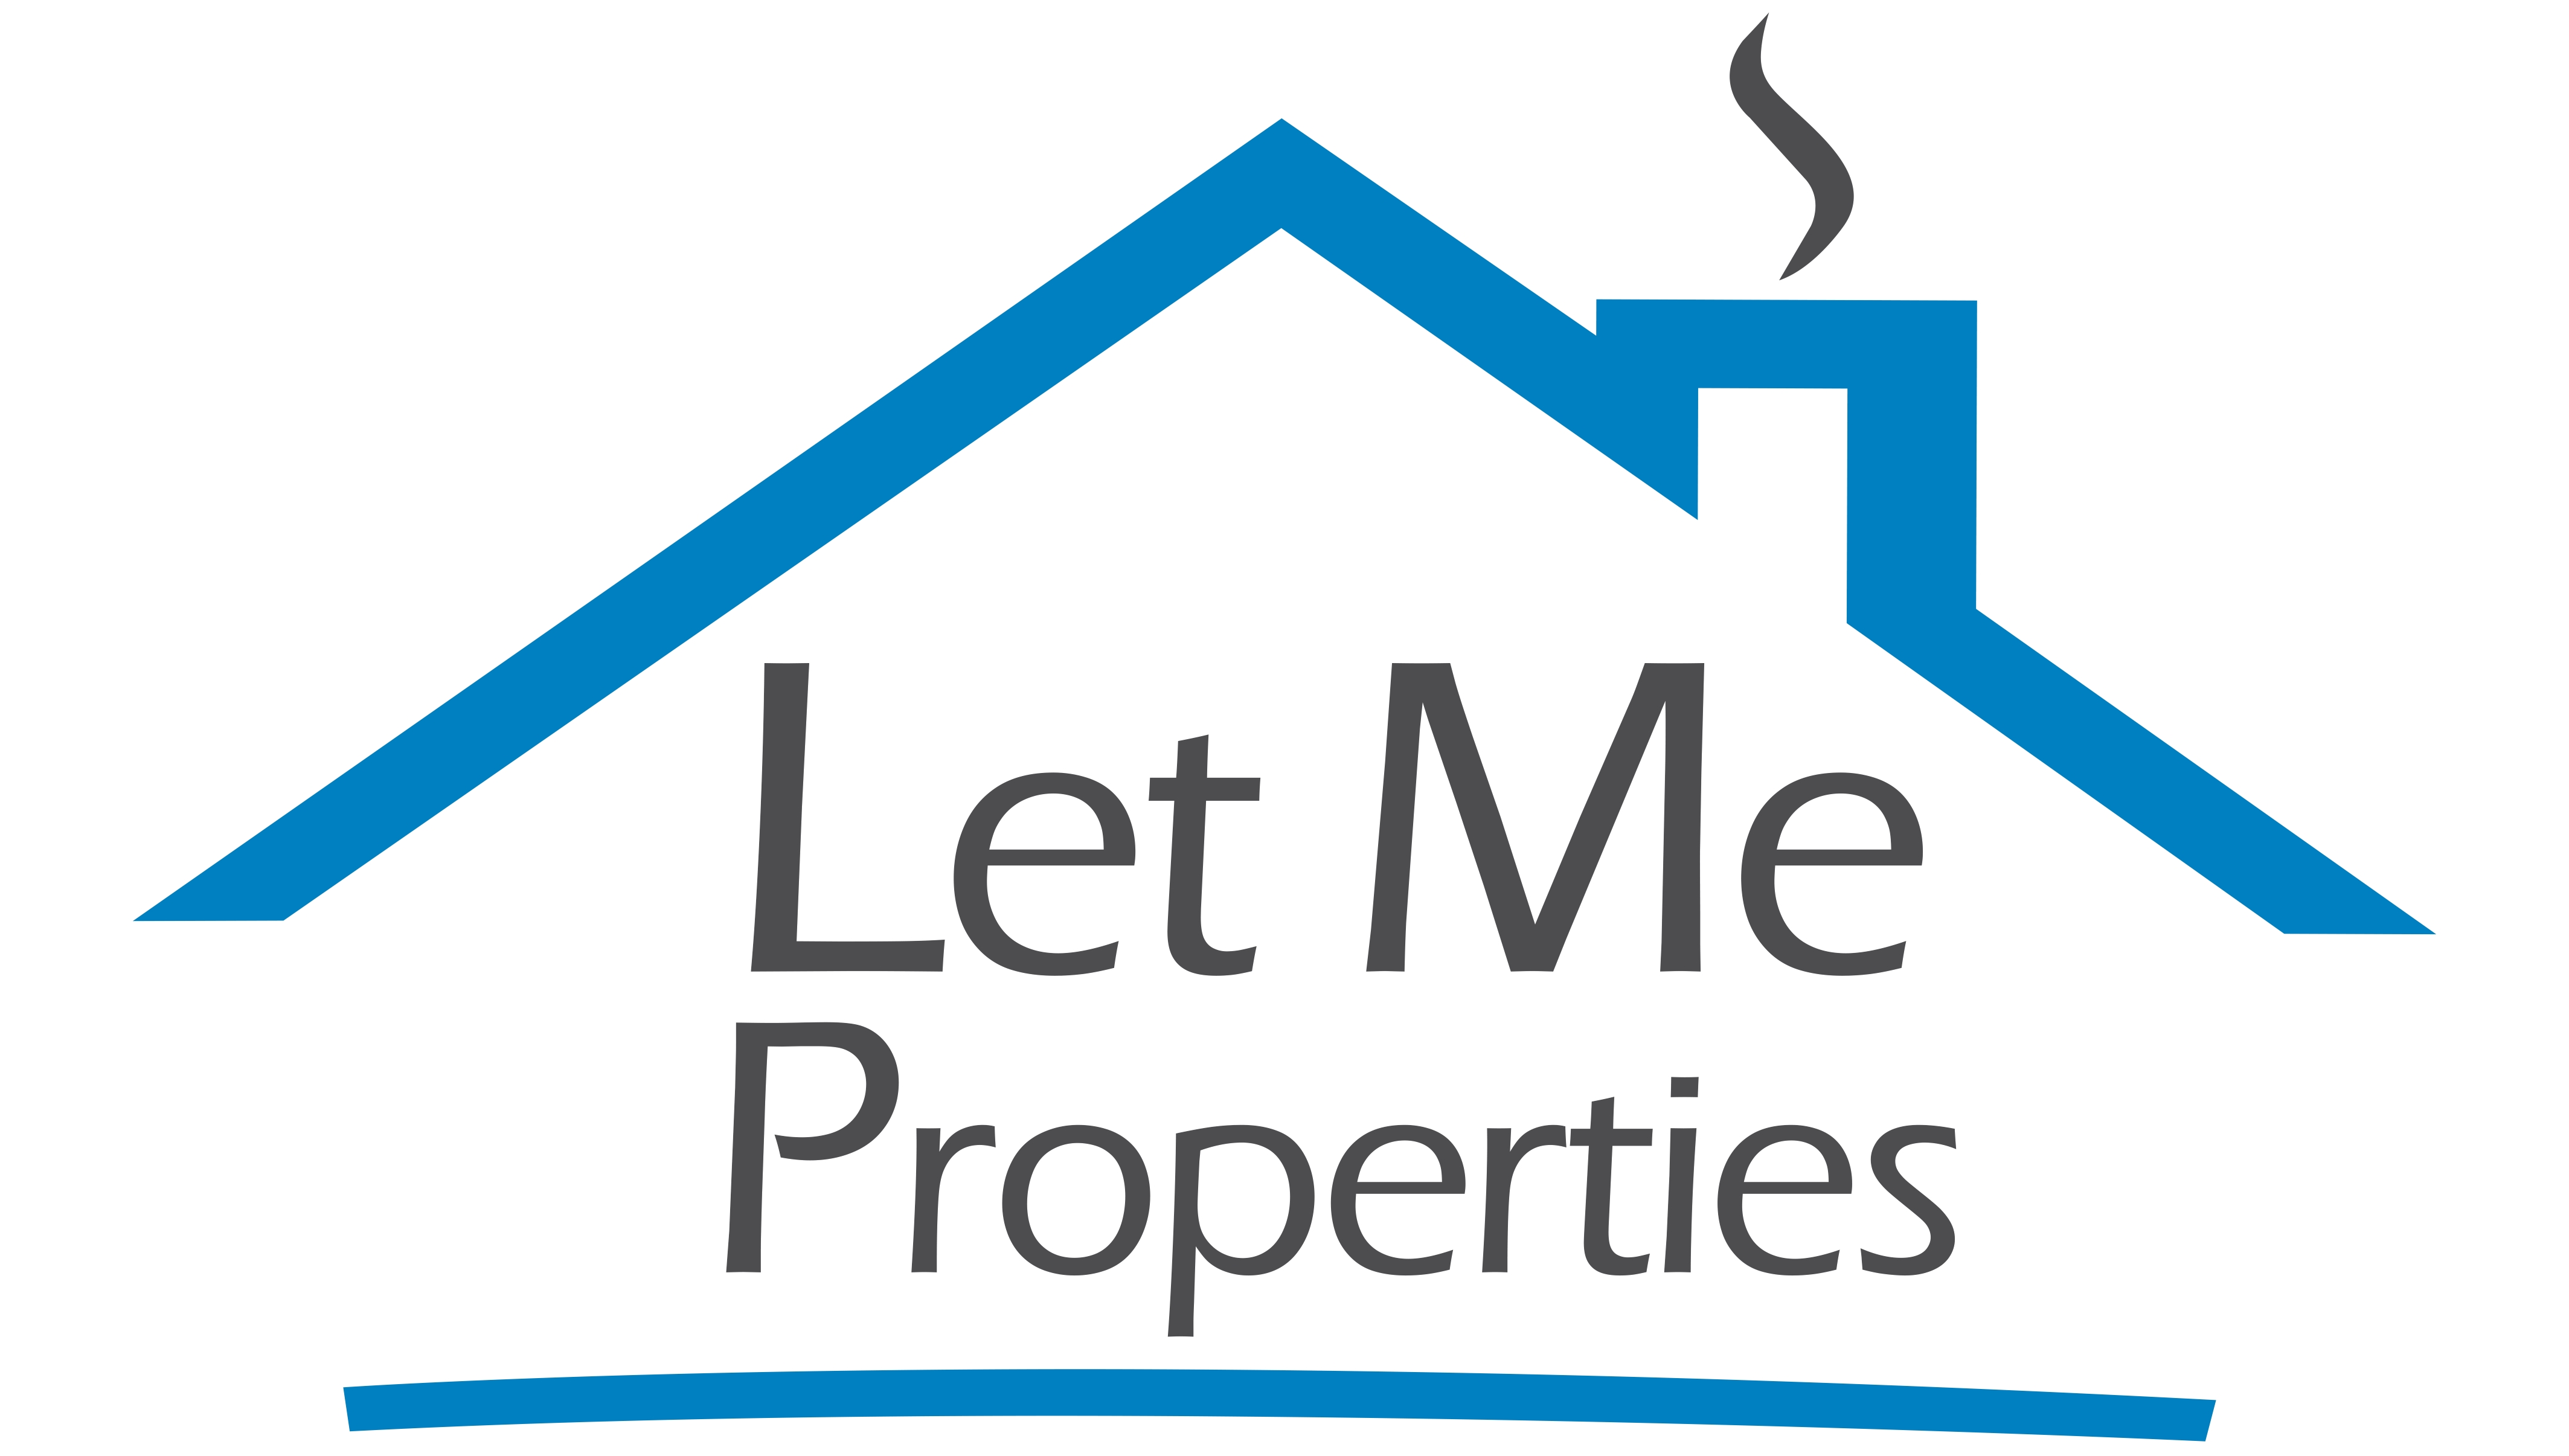 Let Me Properties : Letting agents in Hatfield Hertfordshire